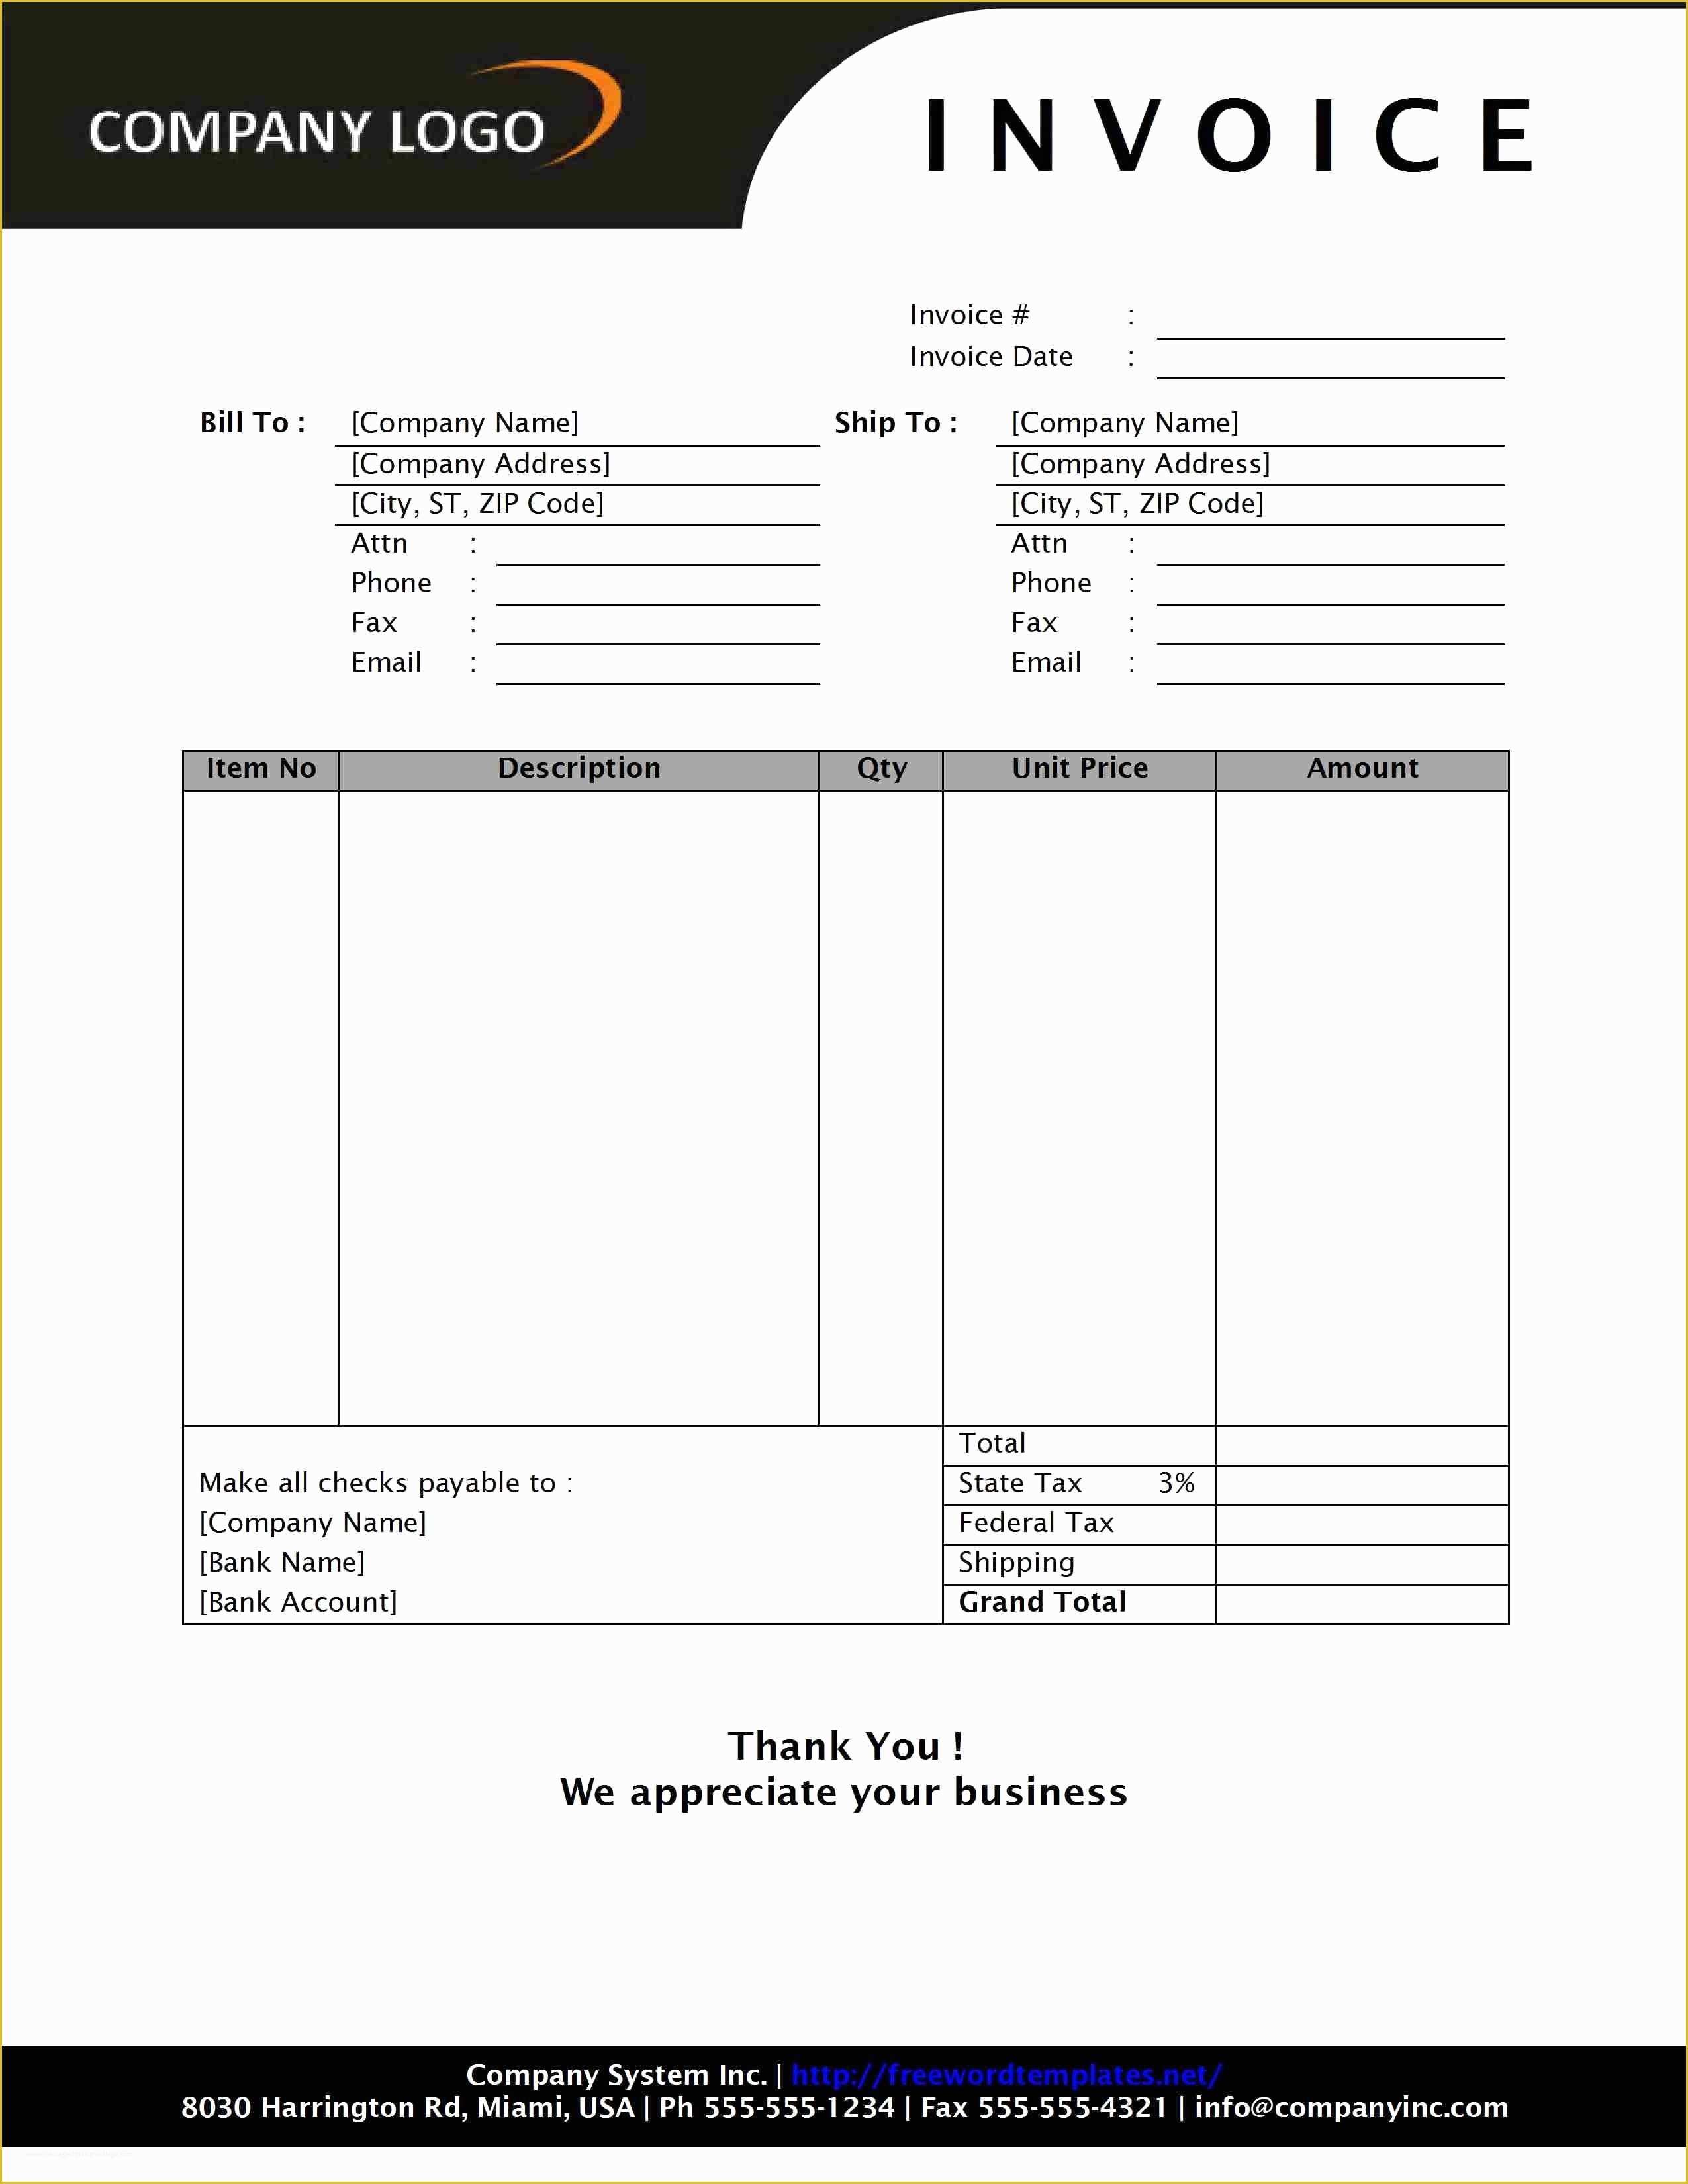 Free Sales Invoice Template Word Of Simple Invoice Template Simple Sales Invoice Sd1 Style